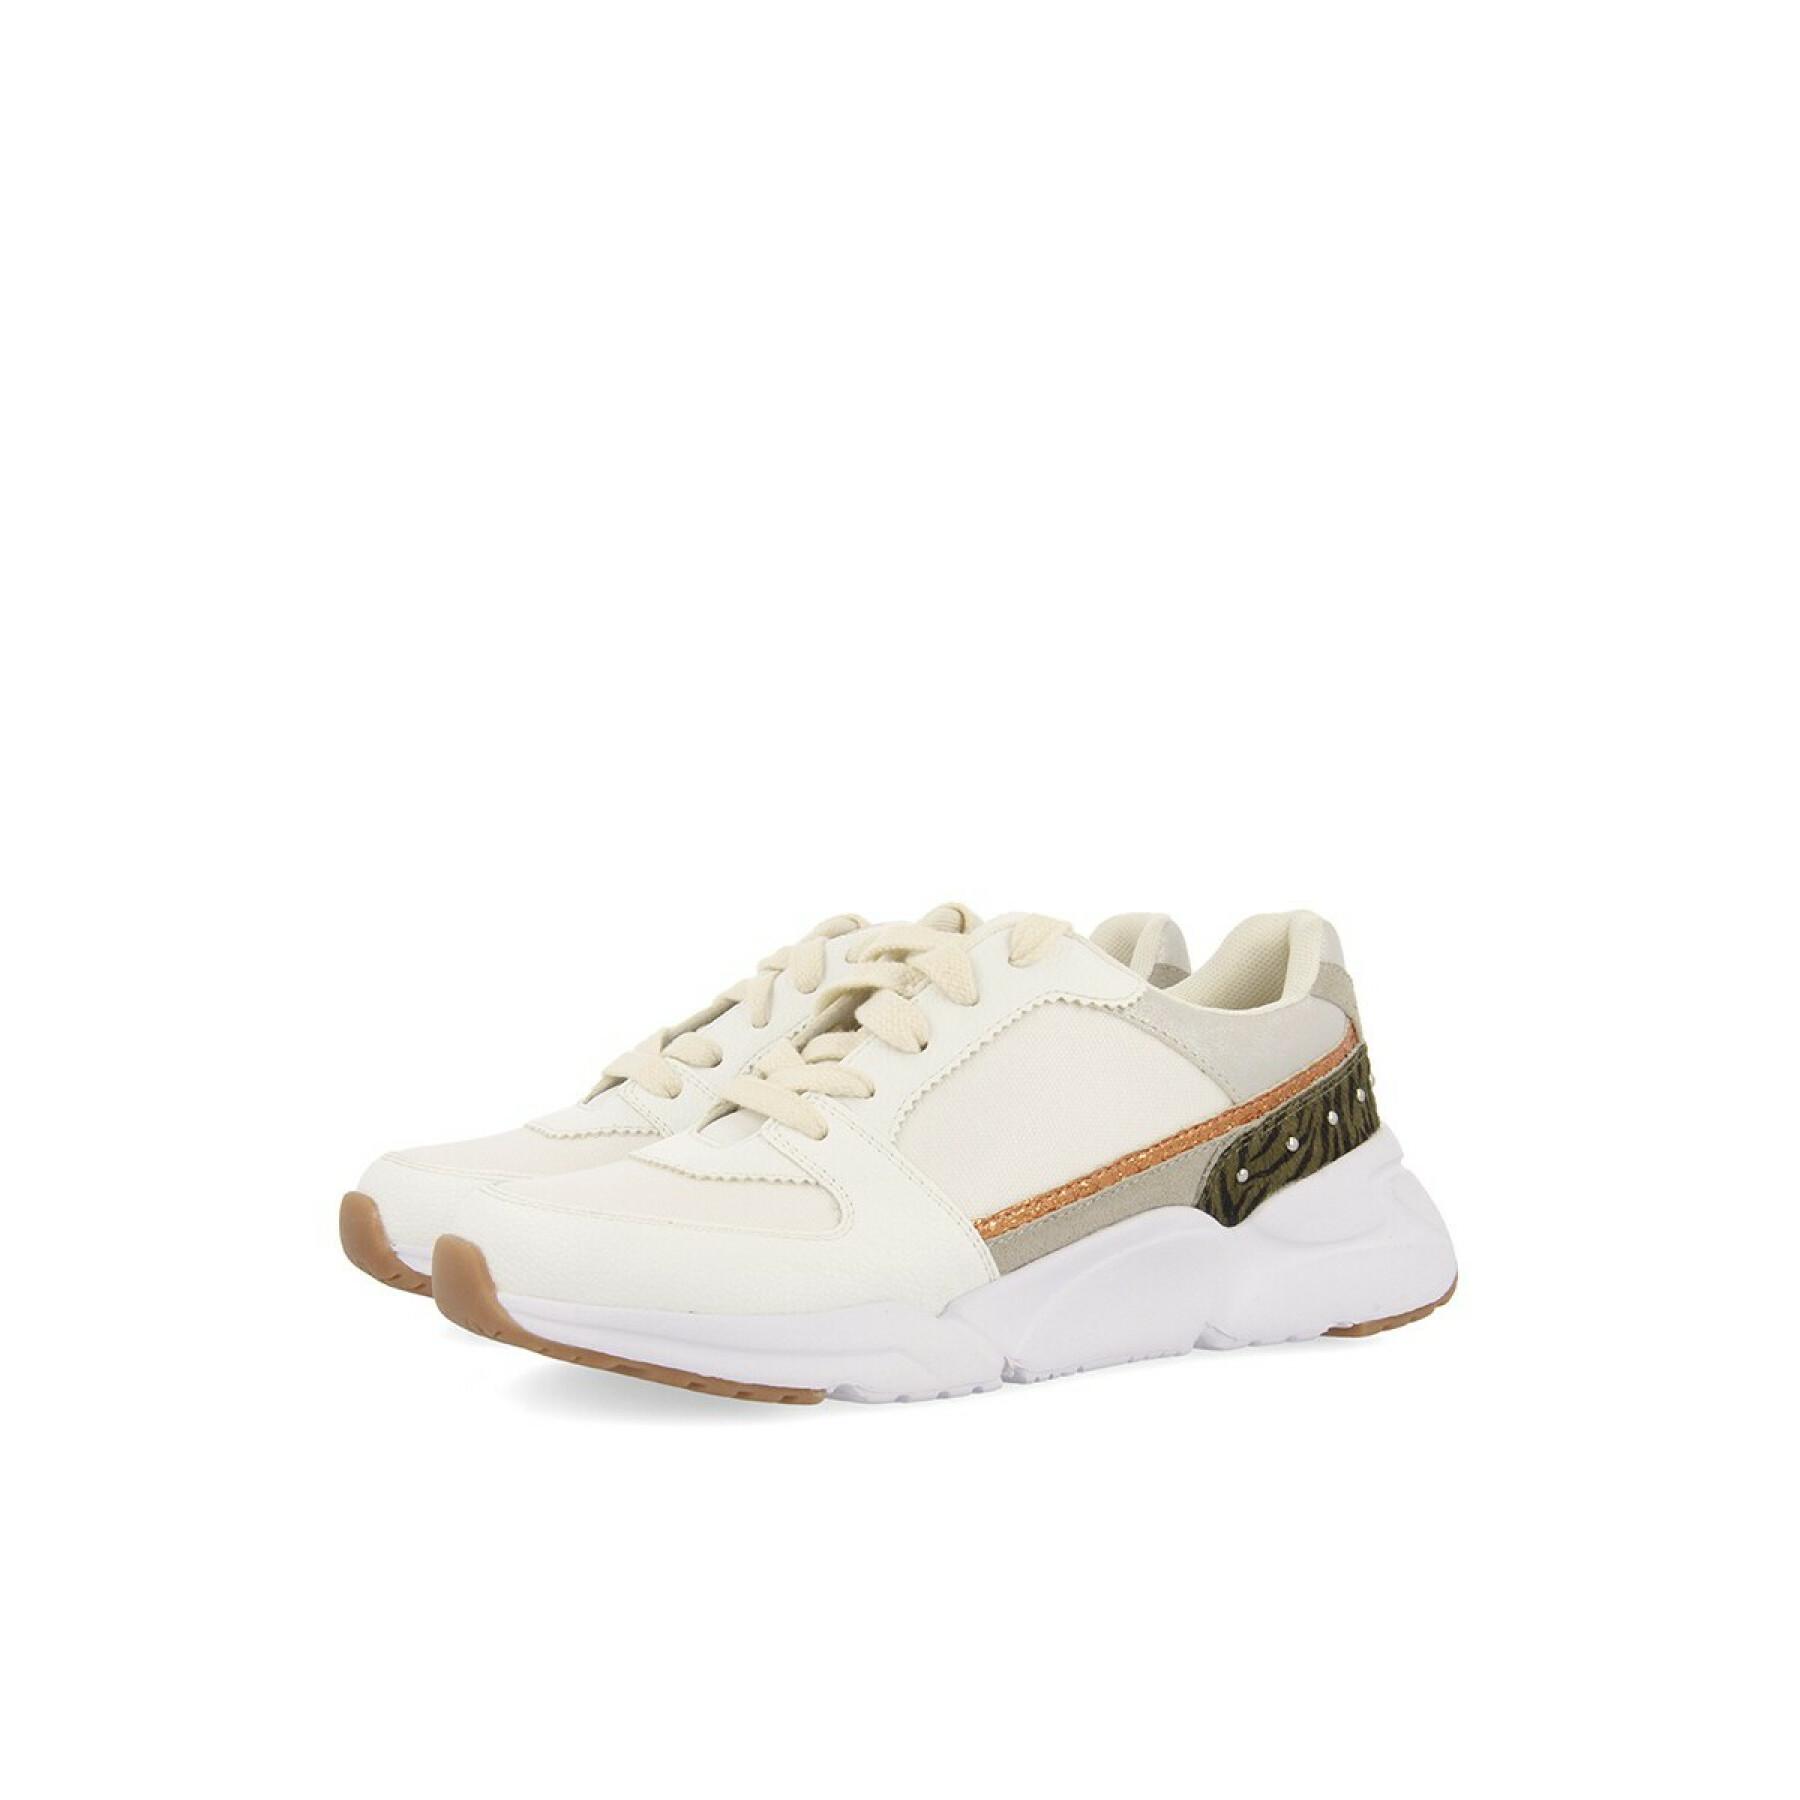 Women's sneakers Gioseppo Lusby